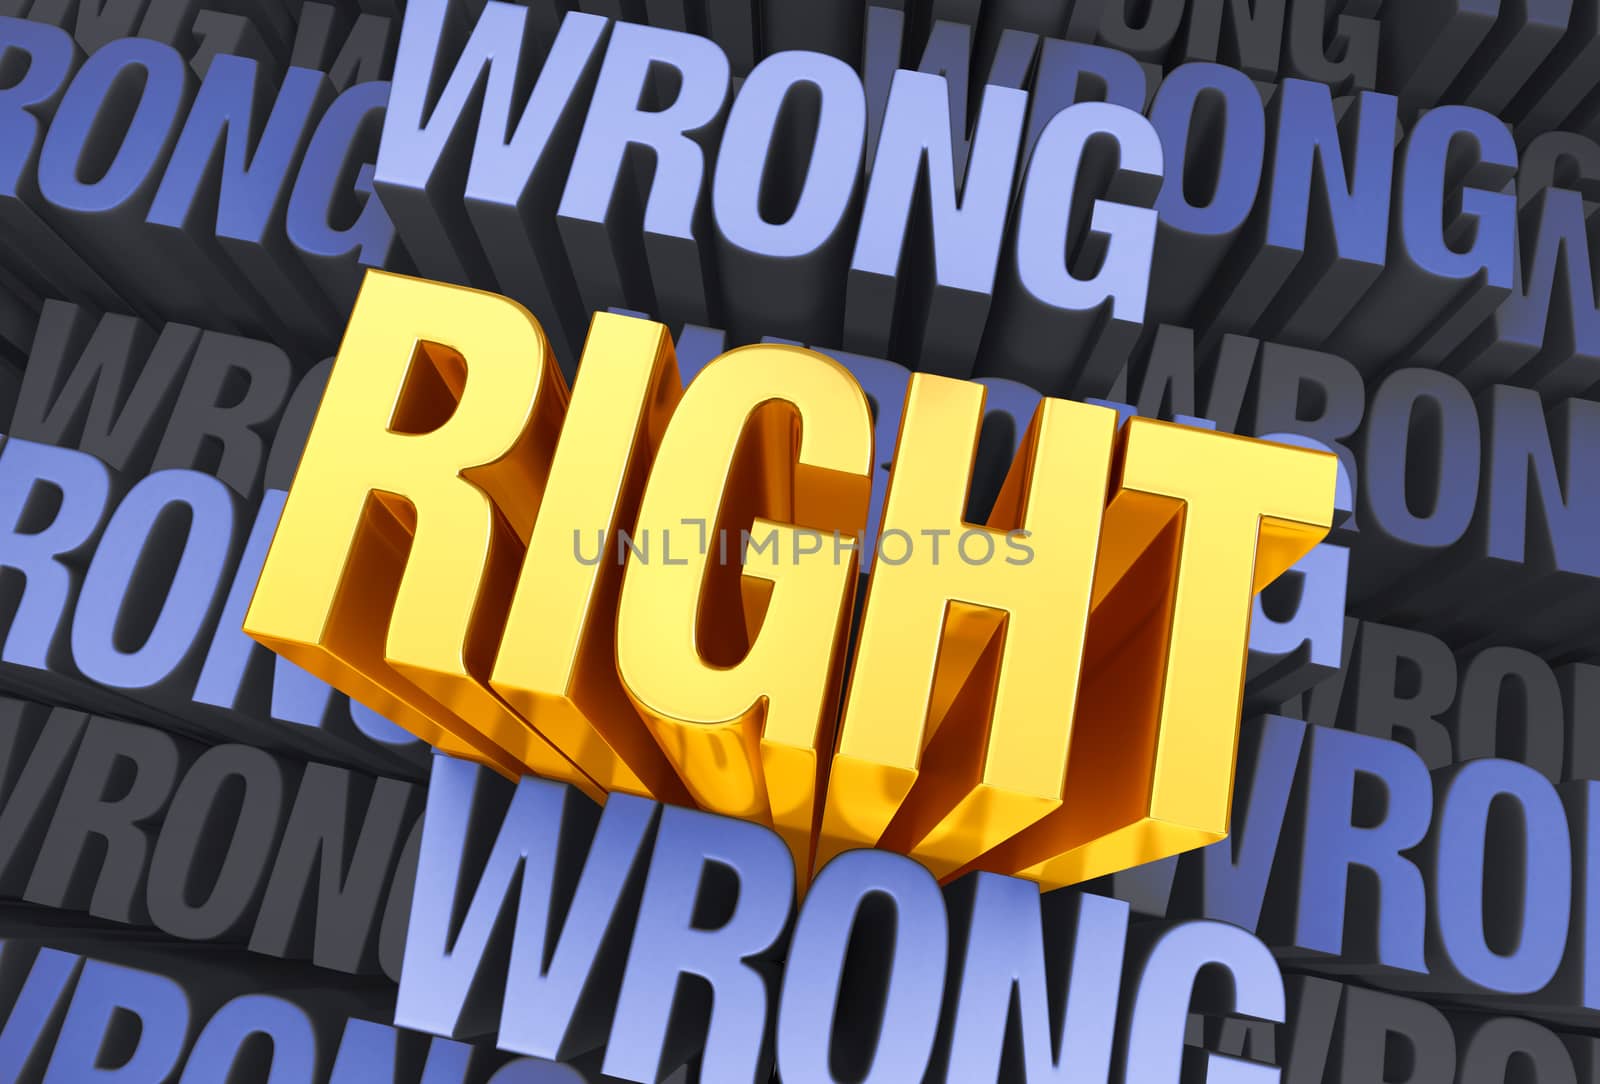 A bright, gold, "RIGHT" arises to stand above a muted background consisting of the word "WRONG" repeated many times at different depths.